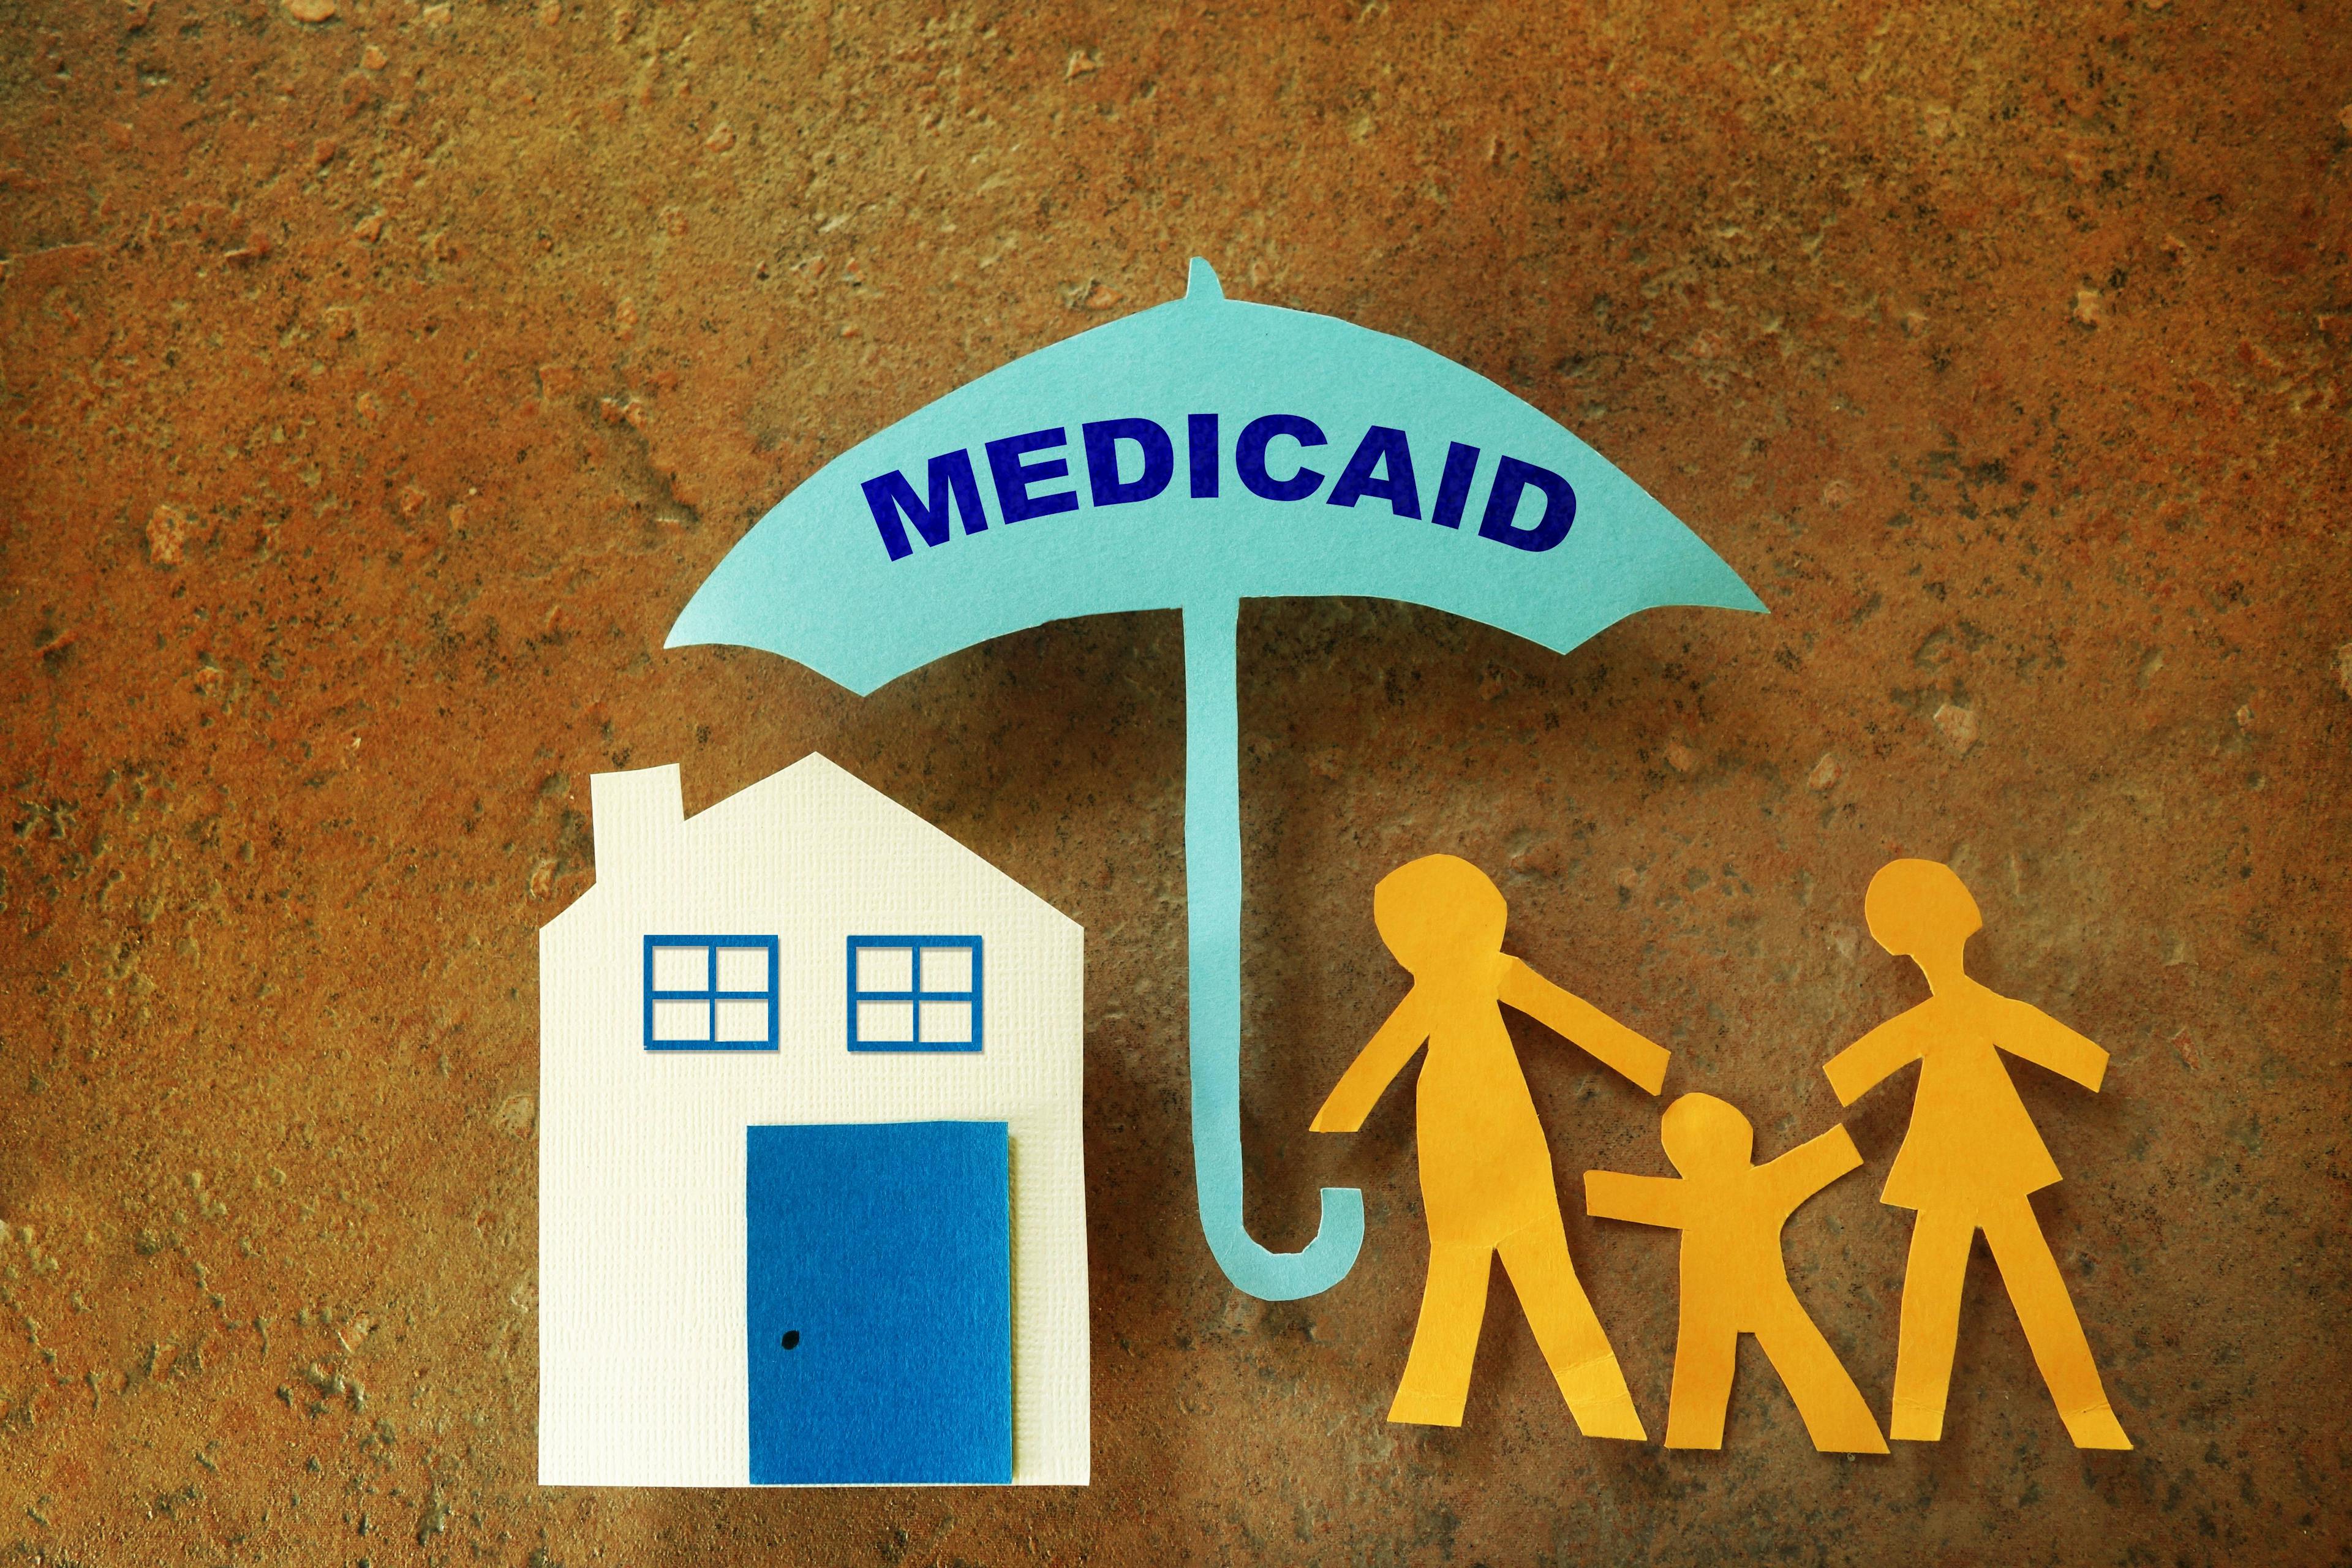 Connecticut Bucks the Medicaid Managed Care Trend